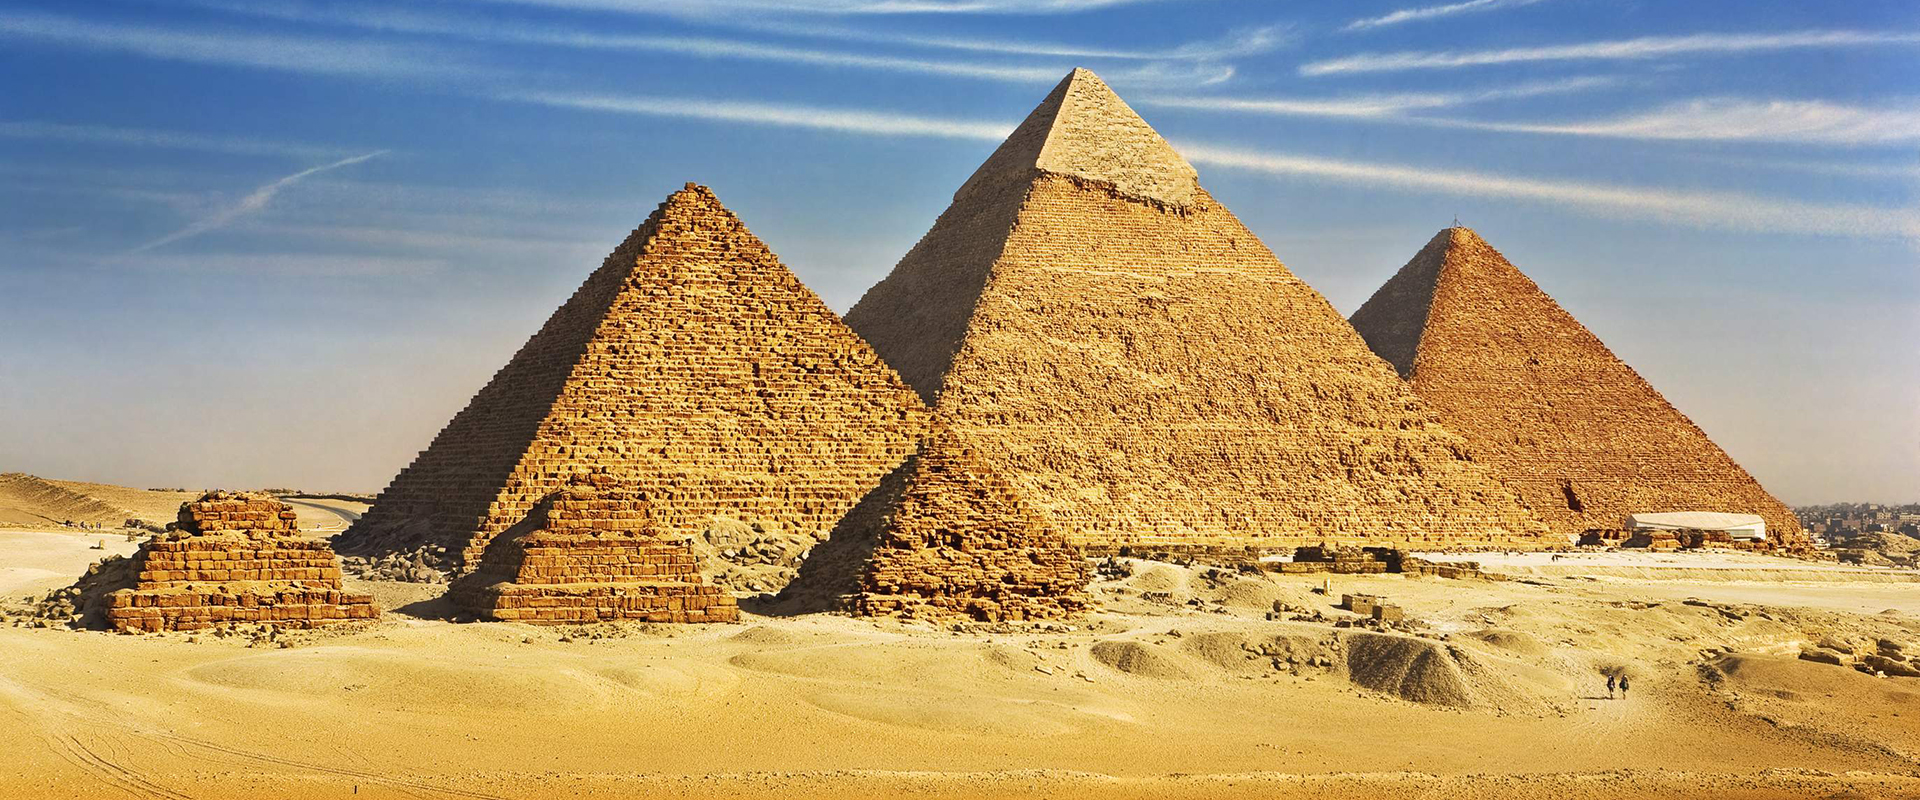 Amazing Cairo Pictures & Backgrounds